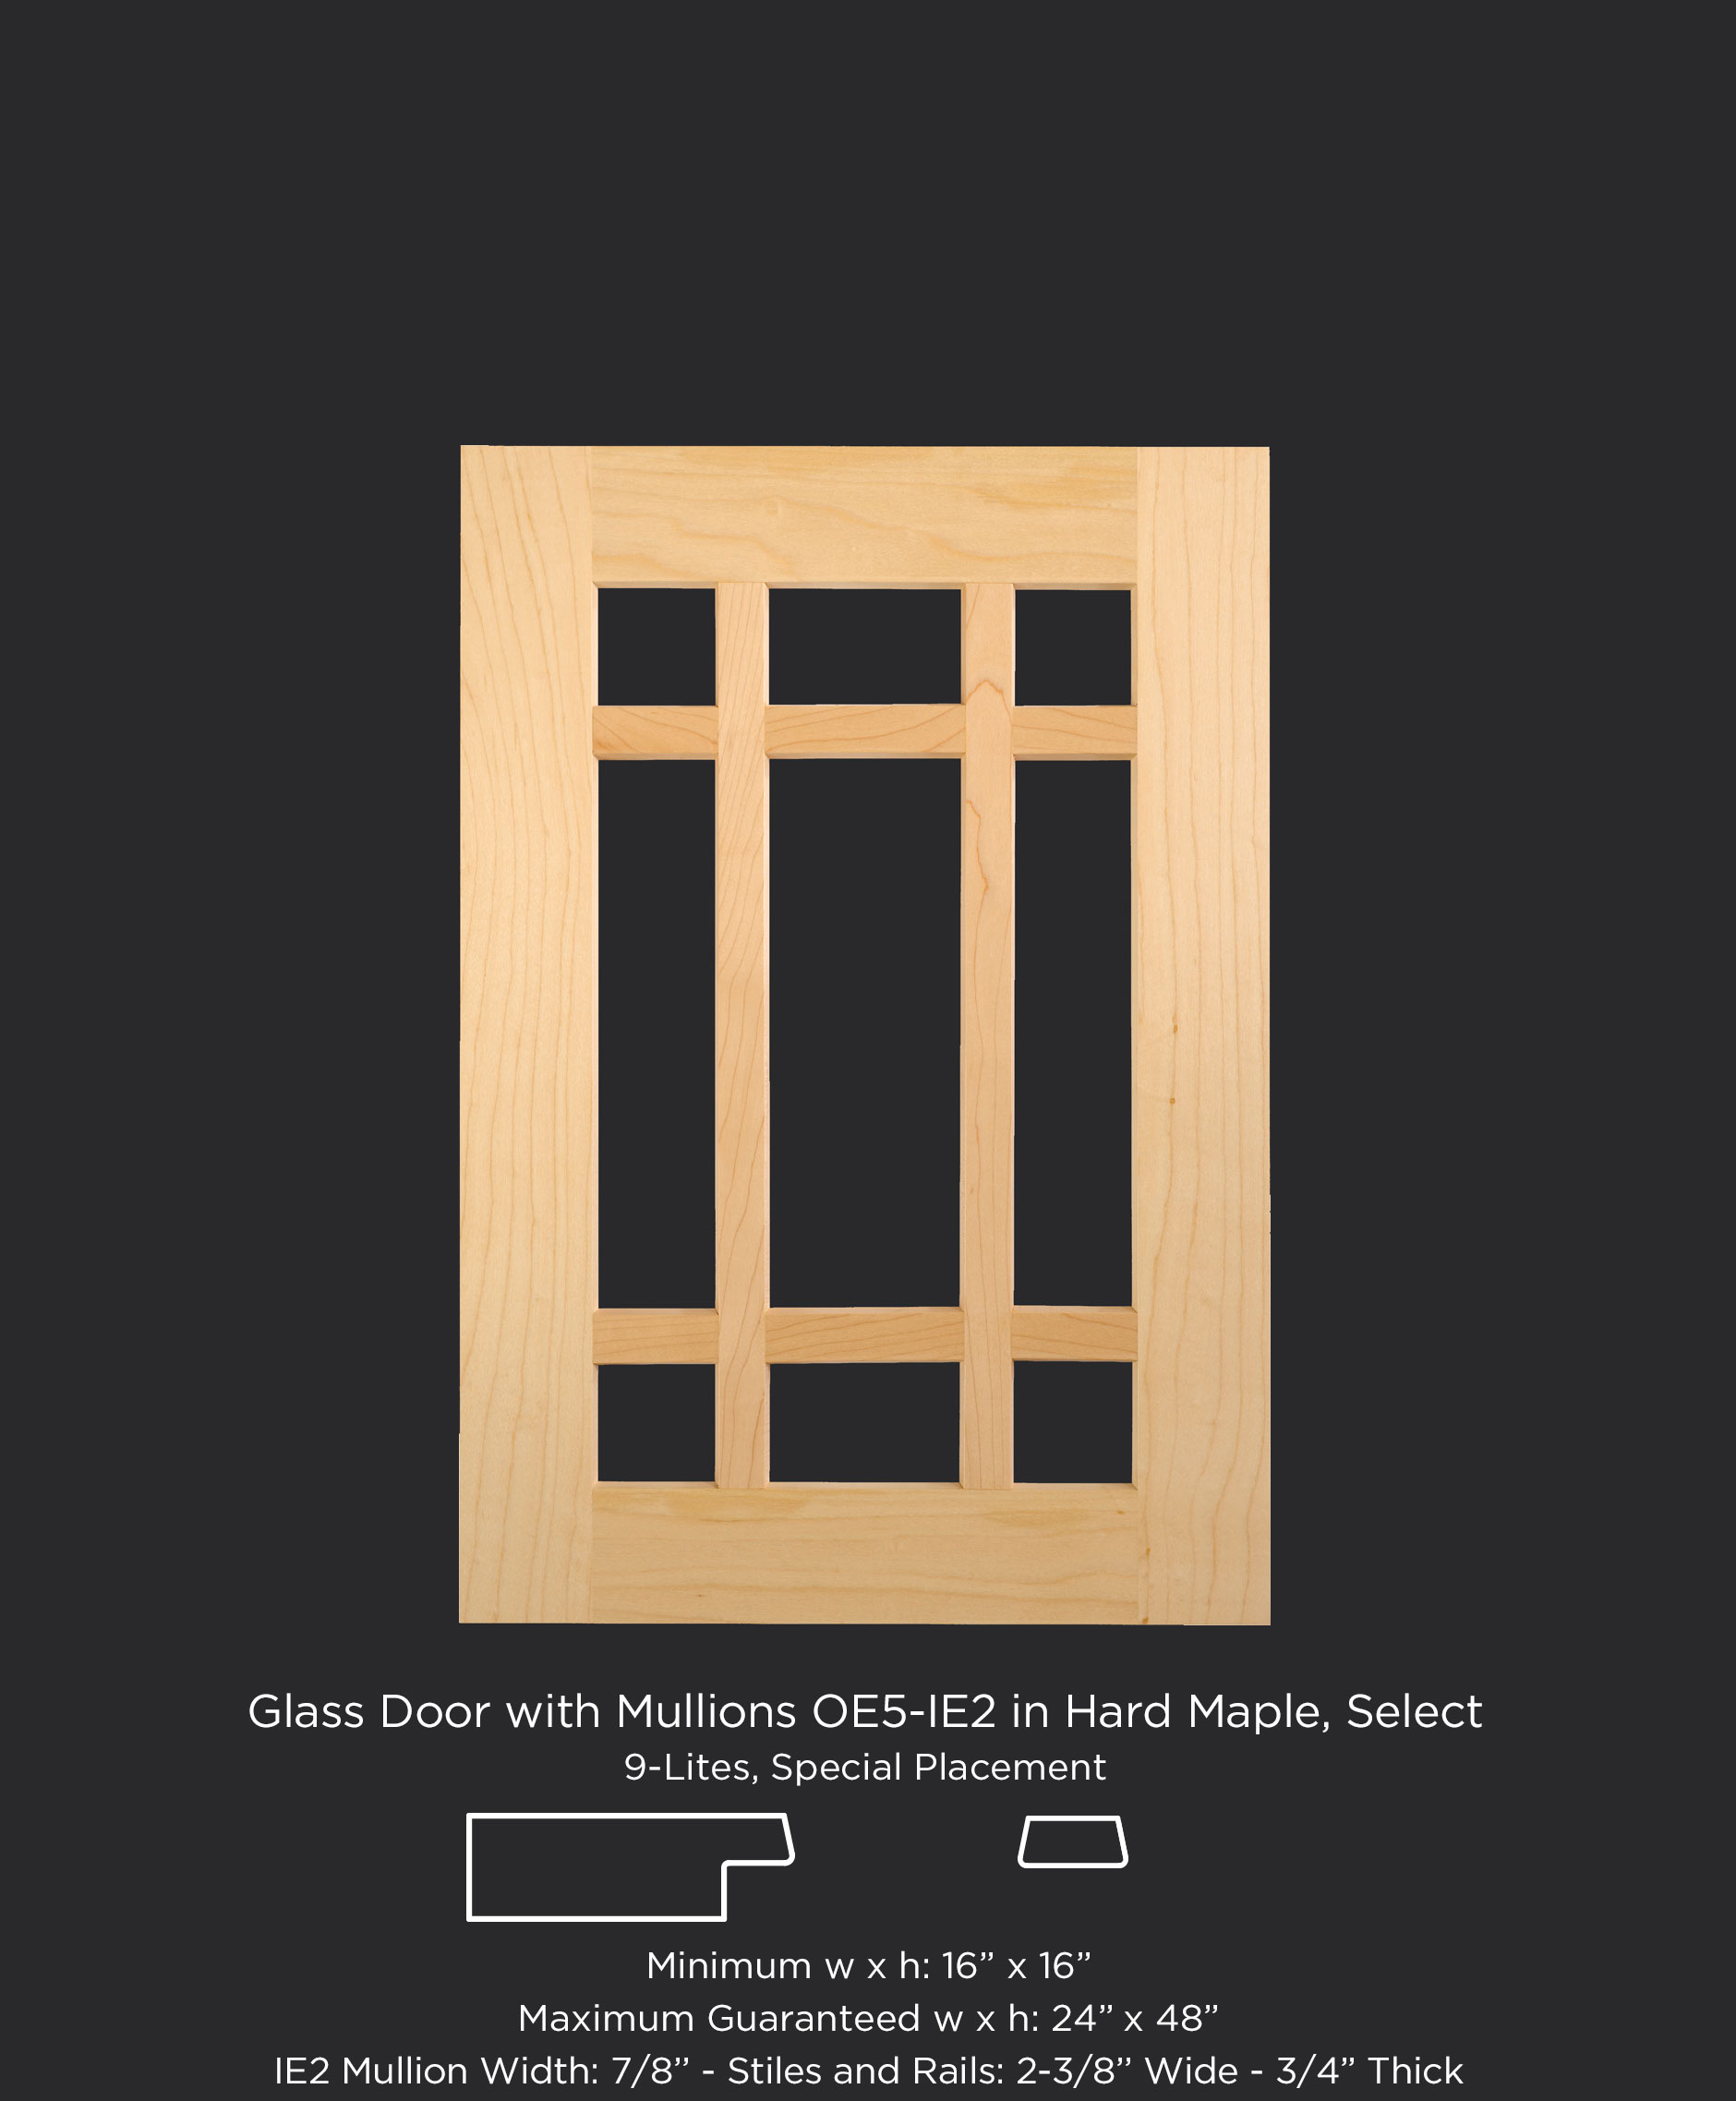 C101 Glass door with 9 lites, OE5, IE2 in Hard Maple Select